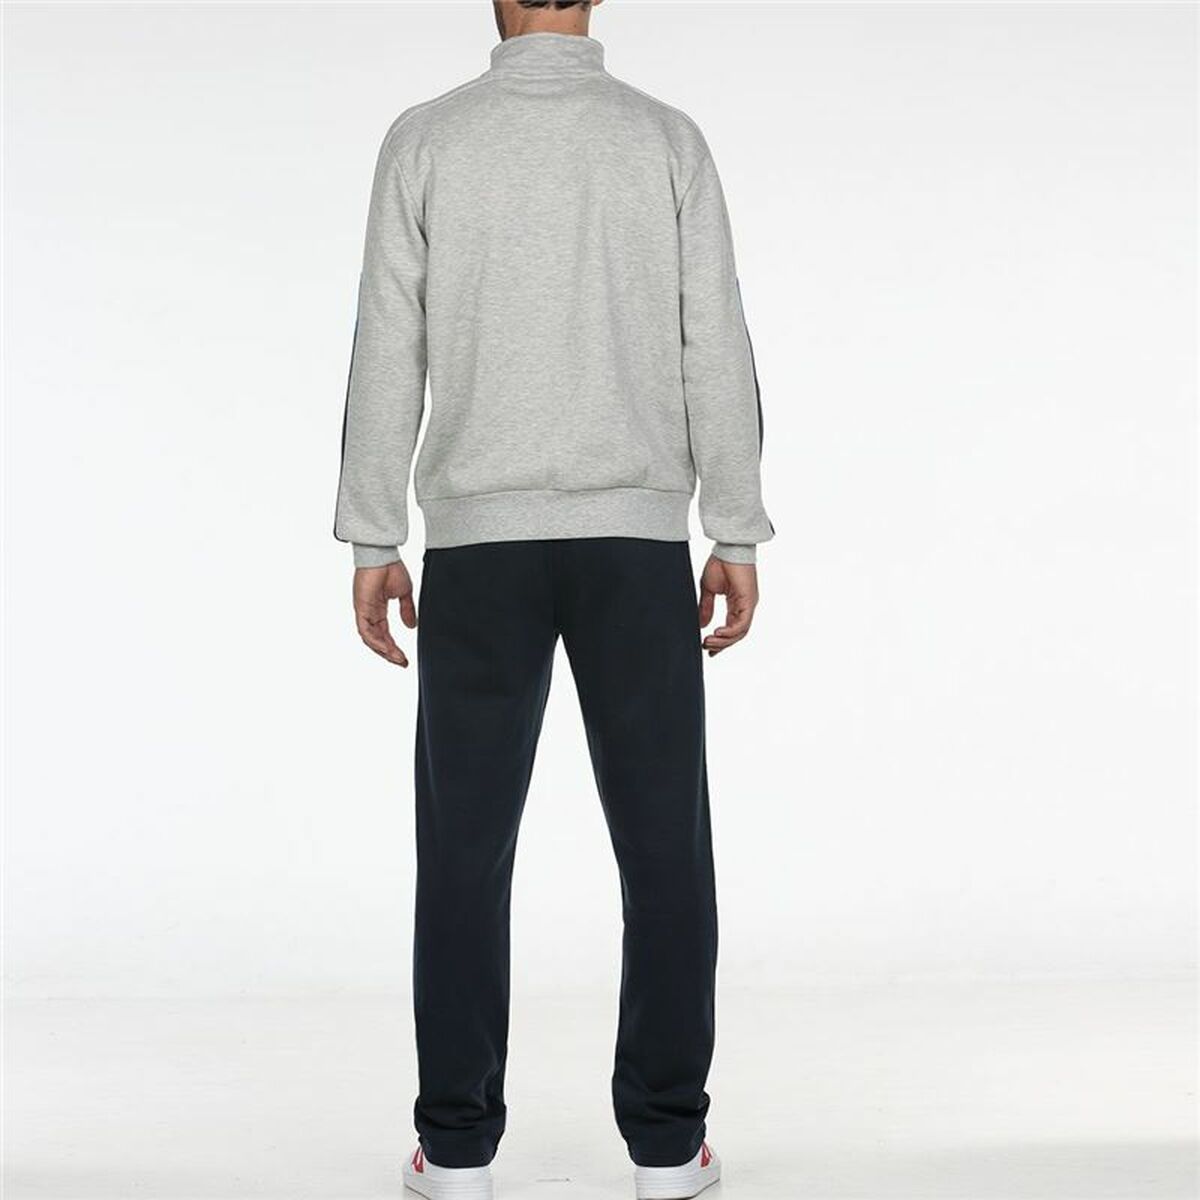 Tracksuit for Adults John Smith Kirie Grey